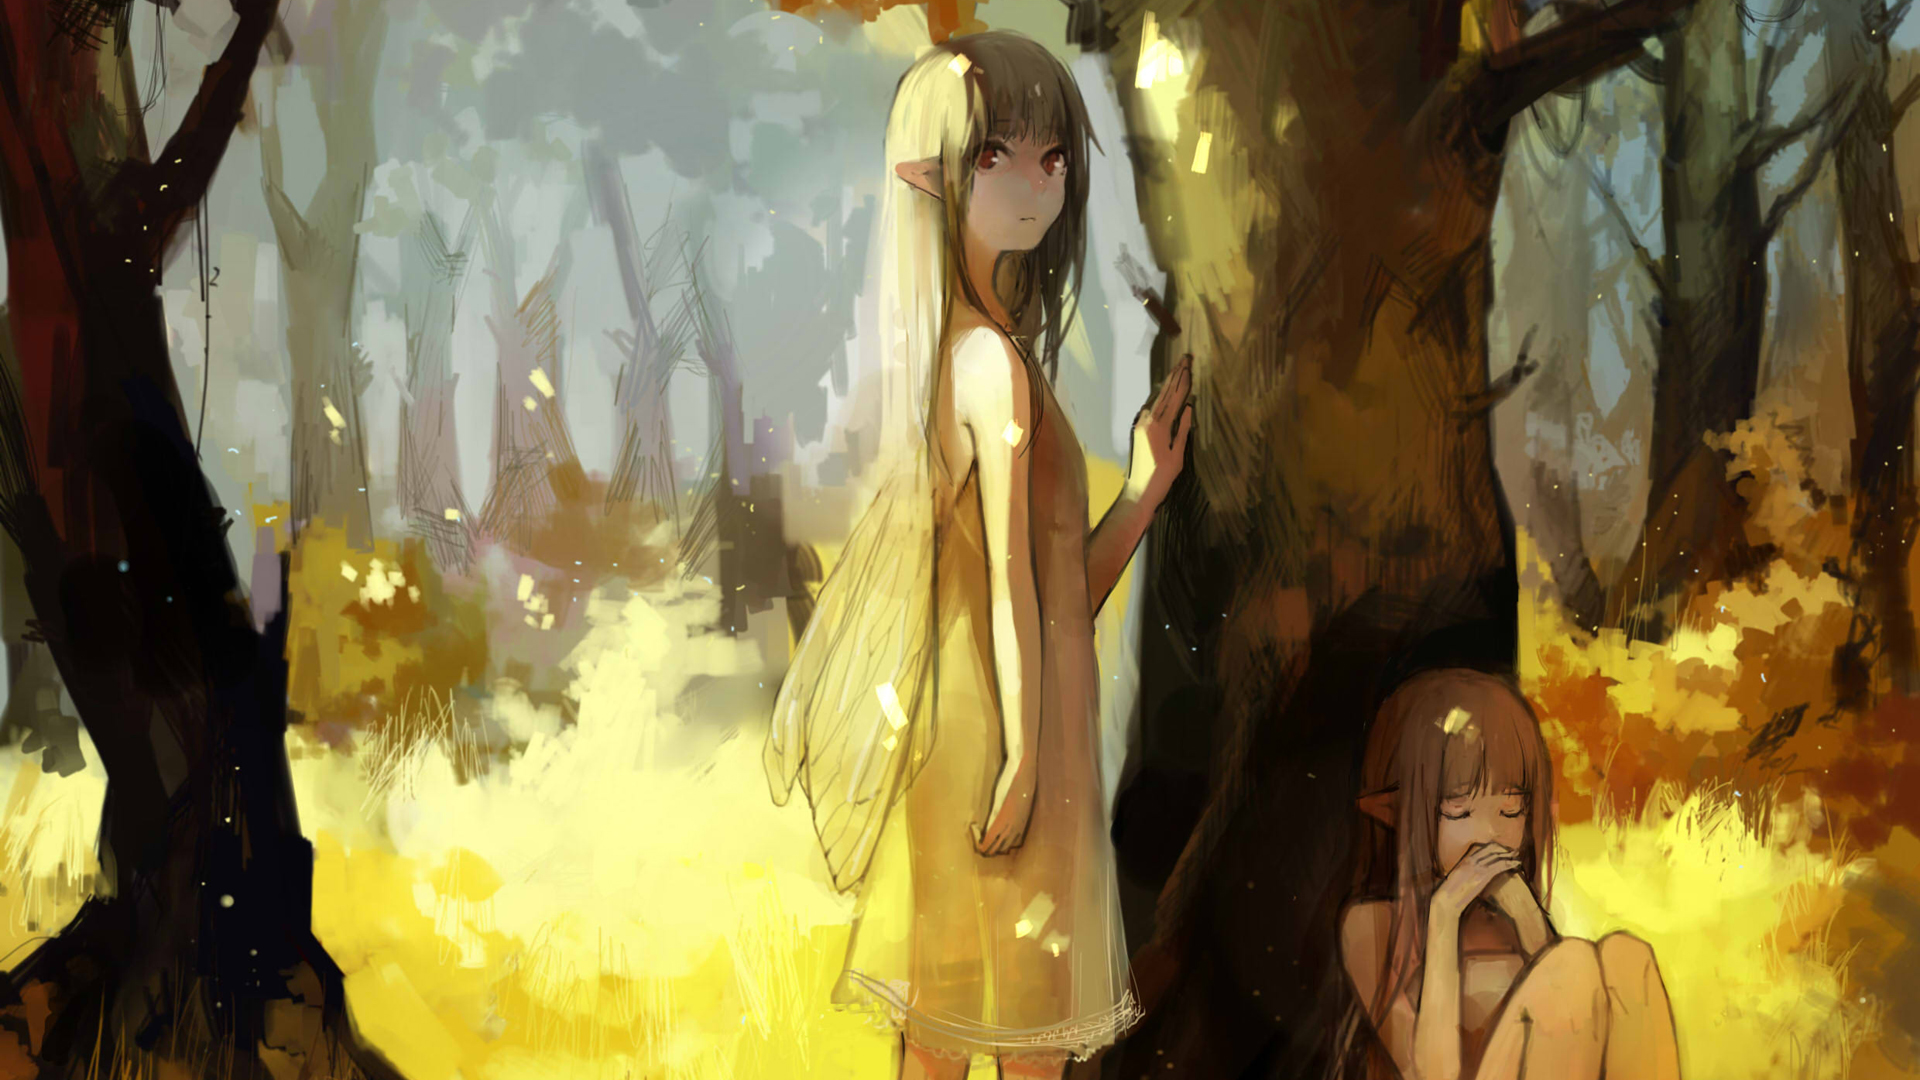 Anime 1920x1080 anime fantasy art anime girls wood elves forest fantasy girl two women women outdoors nature trees standing sitting pointy ears looking at viewer red eyes closed eyes